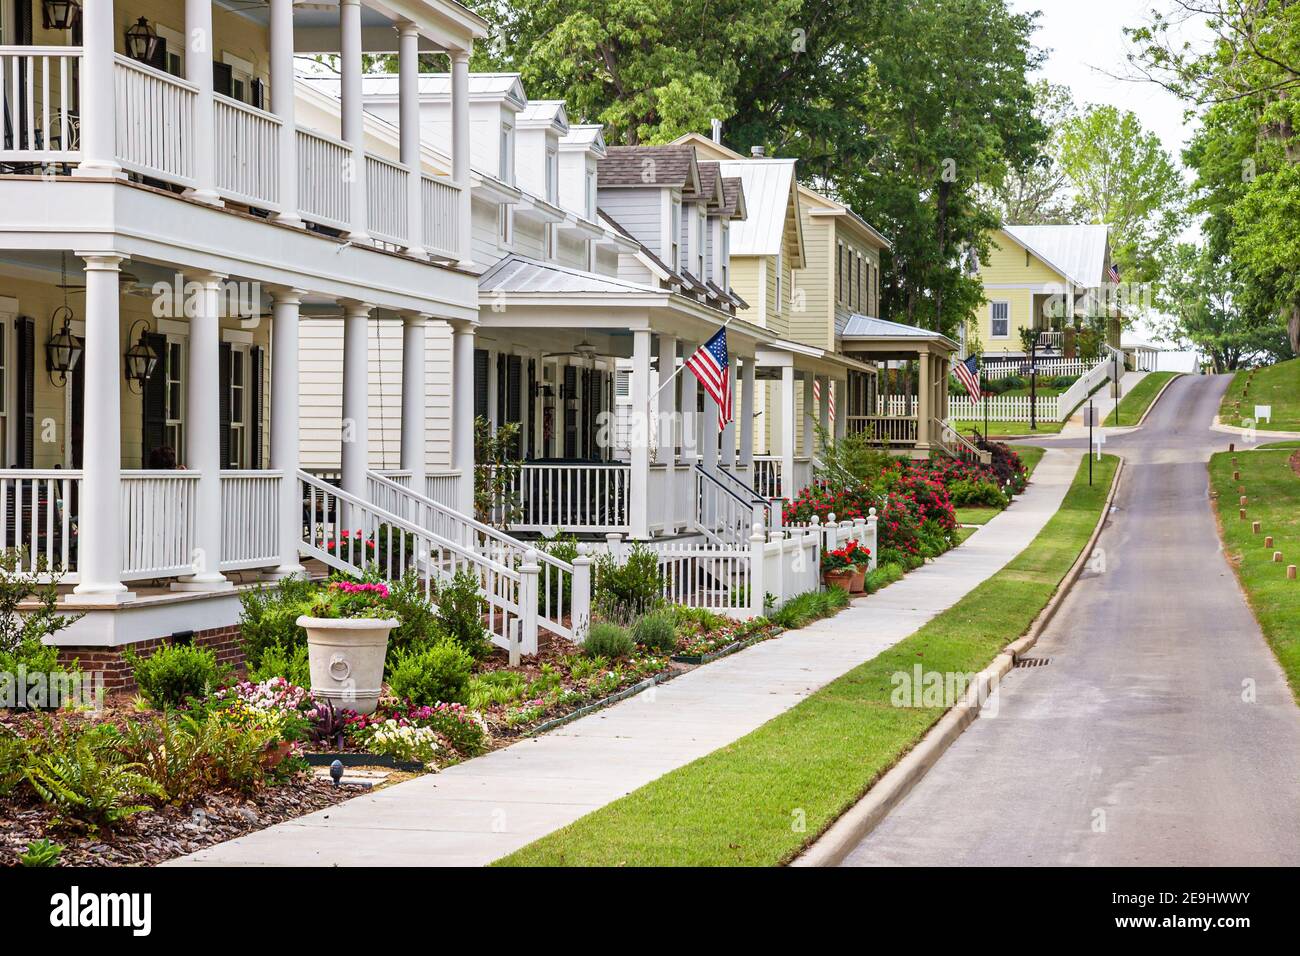 Alabama Montgomeery Pike Road The Waters planned community homes,traditional Americana architecture porch front entrance exterior picket fence, Stock Photo